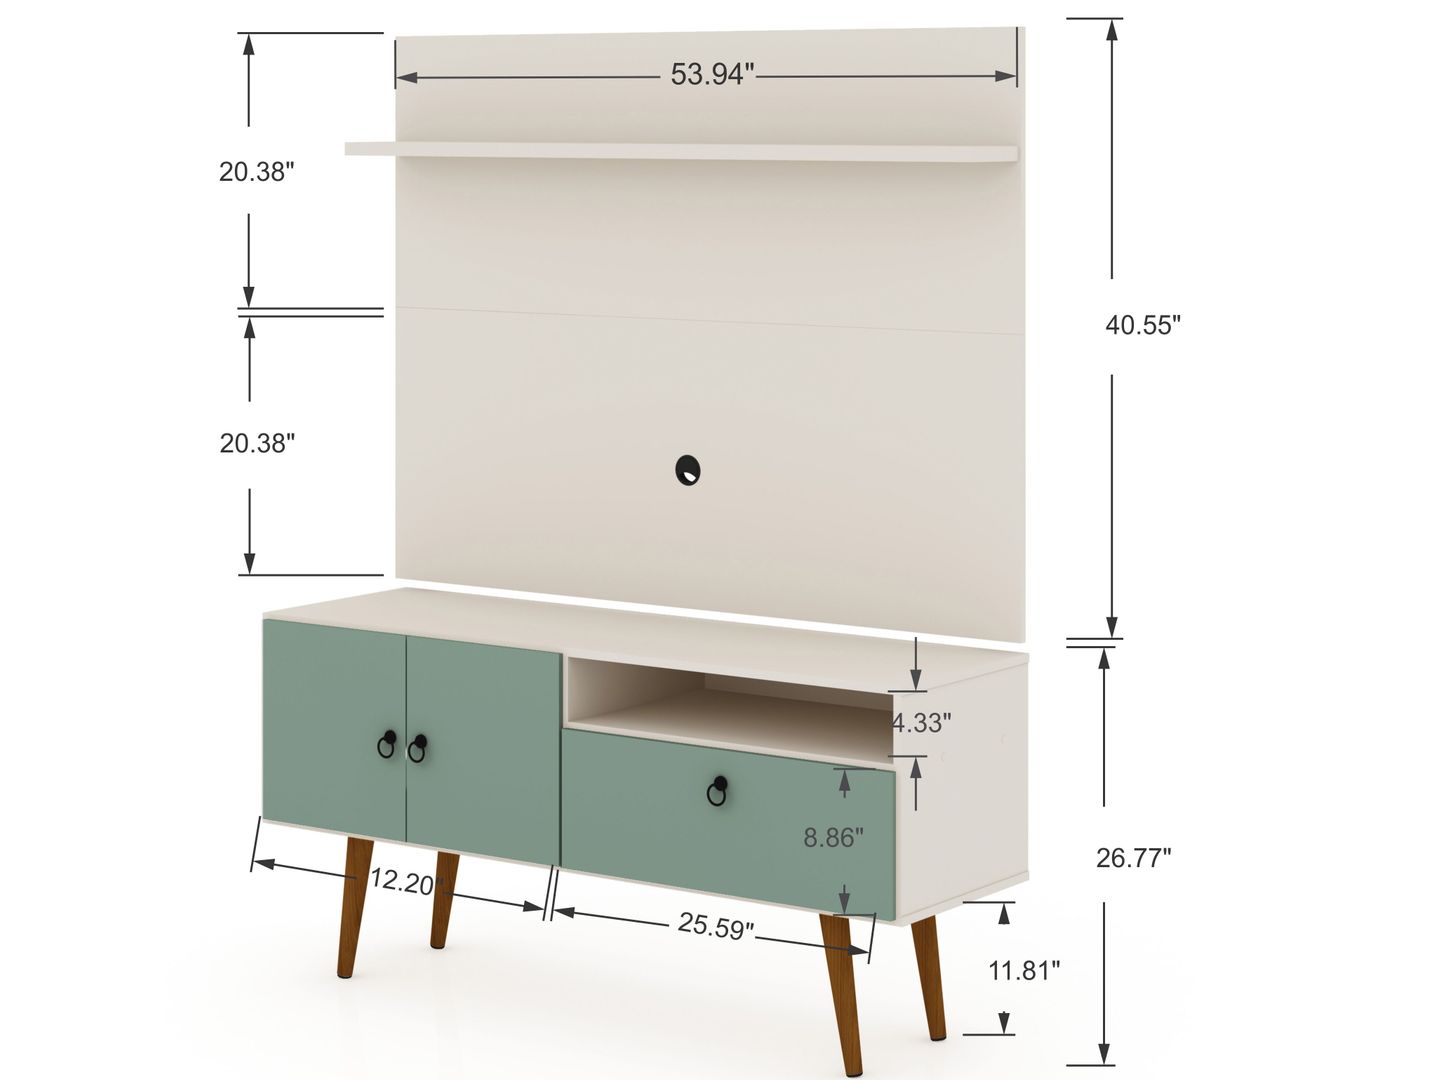 Manhattan Comfort Tribeca 53.94 Mid-Century Modern TV Stand and Panel with Media and Display Shelves in Off White and Green Mint